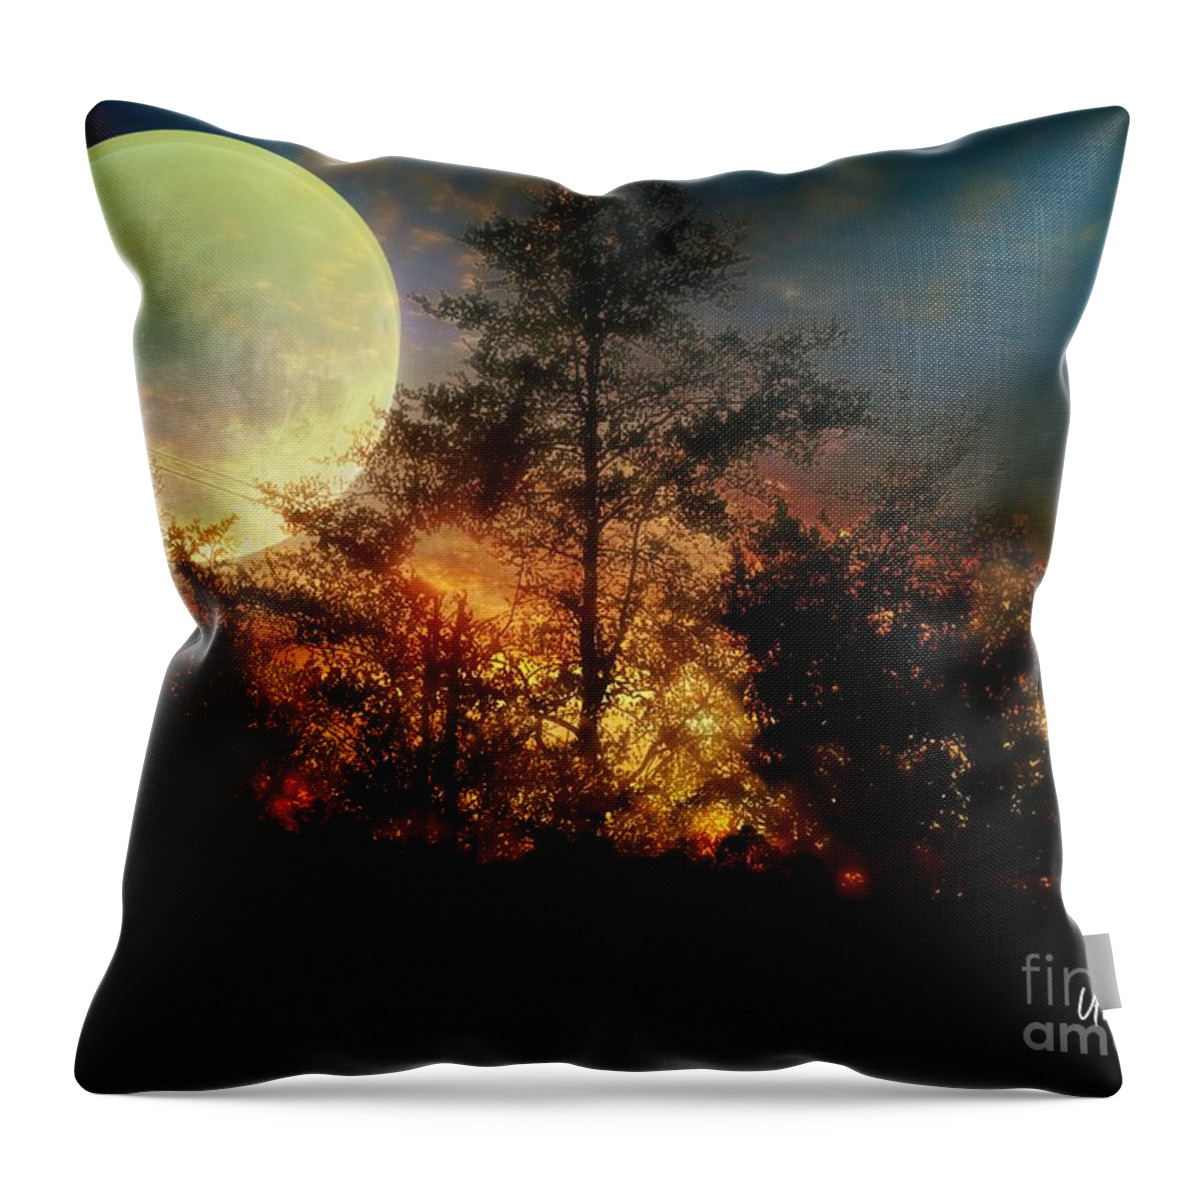 Yellow Moon Throw Pillow featuring the photograph Yellow Moon by Maria Urso